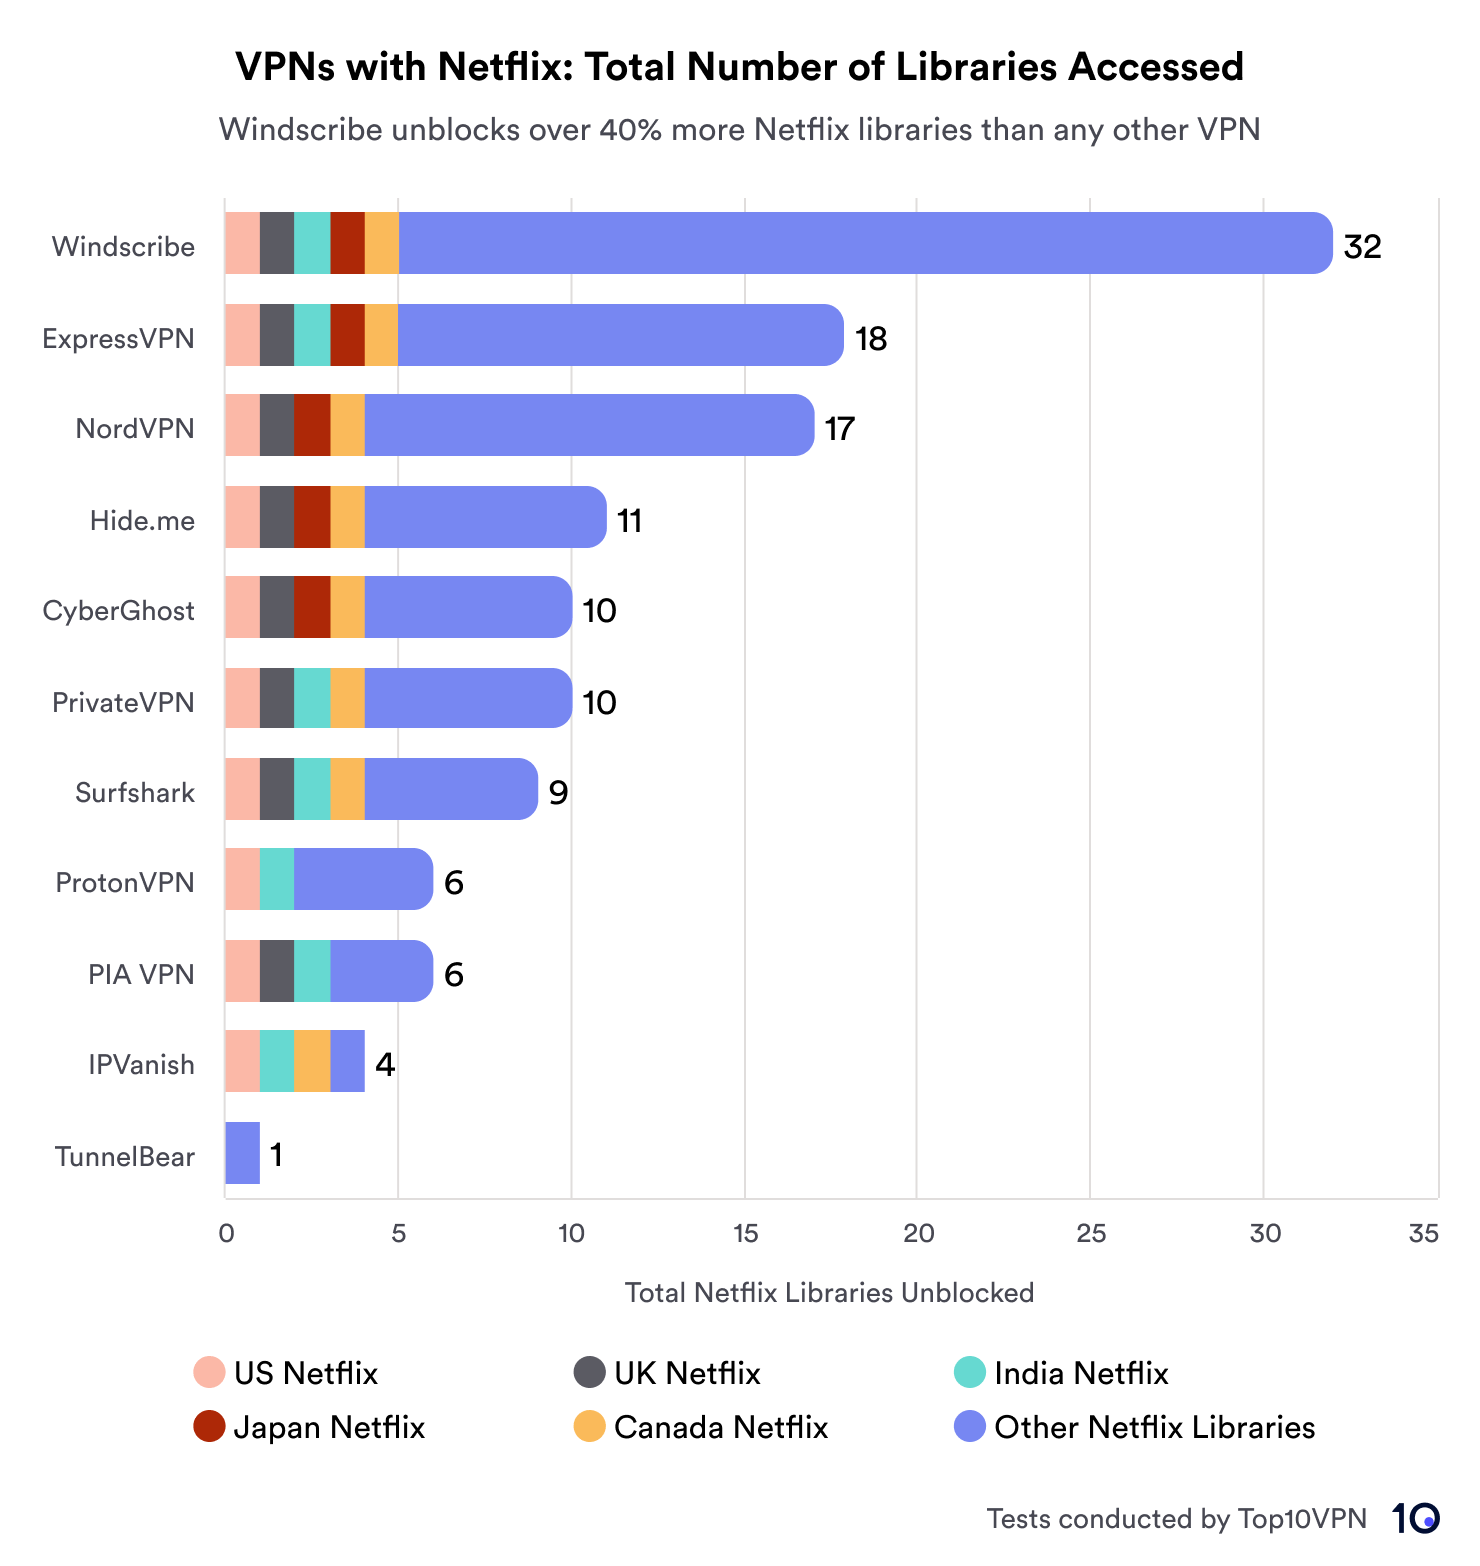 Bar chart comparing VPN services based on the total number of Netflix libraries accessed. Windscribe leads with 32 libraries, followed by ExpressVPN and NordVPN with 18 and 17 respectively. The chart includes a key indicating regions like the US, UK, Japan, Canada, India, and others.